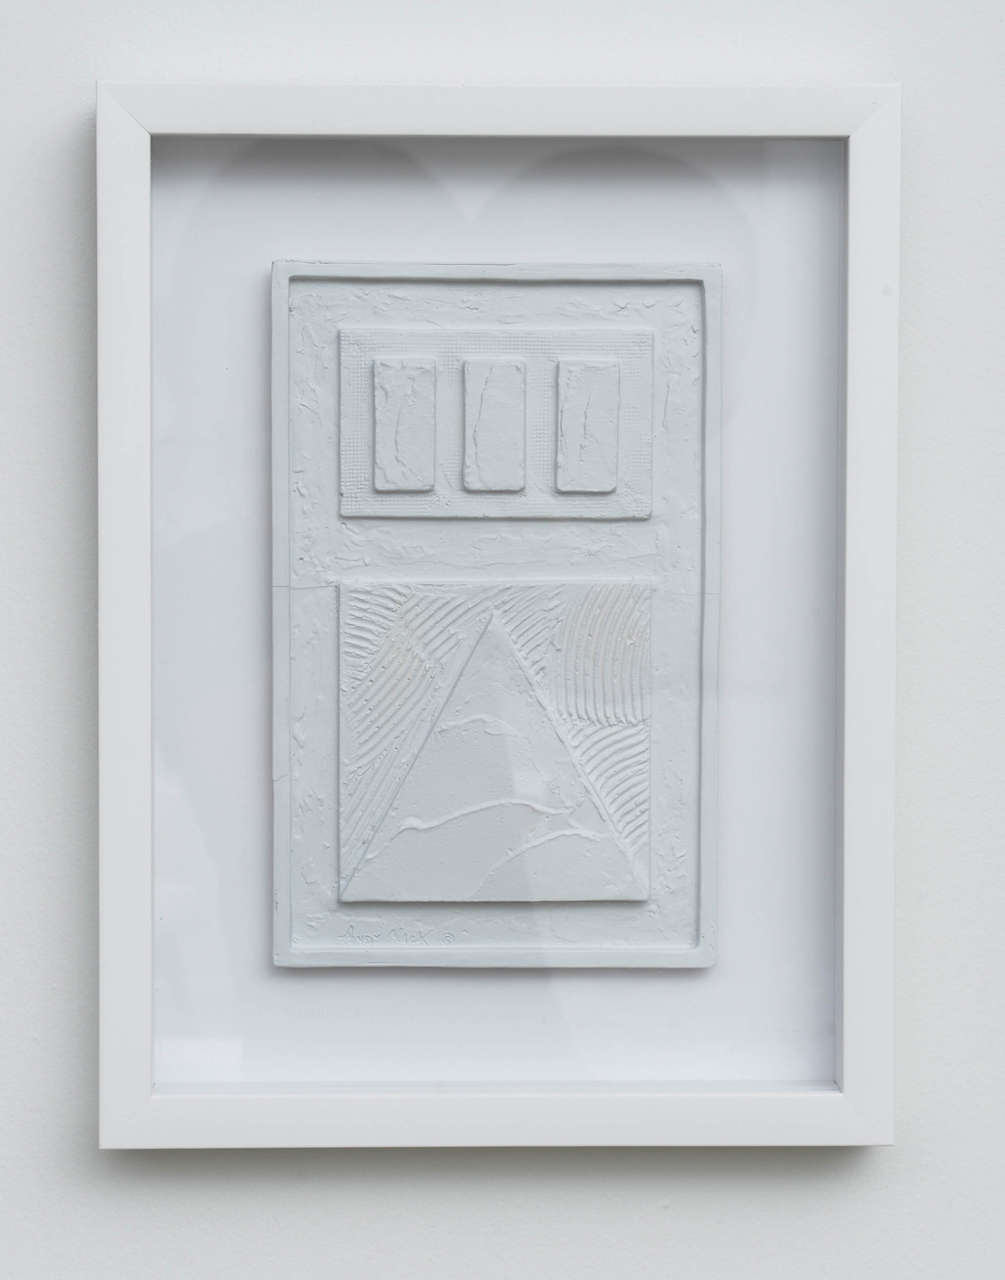 A fun, geometric, plastered wall relief framed with shadowbox.

White matte plaster finish. 

Two available, priced and shown individually.